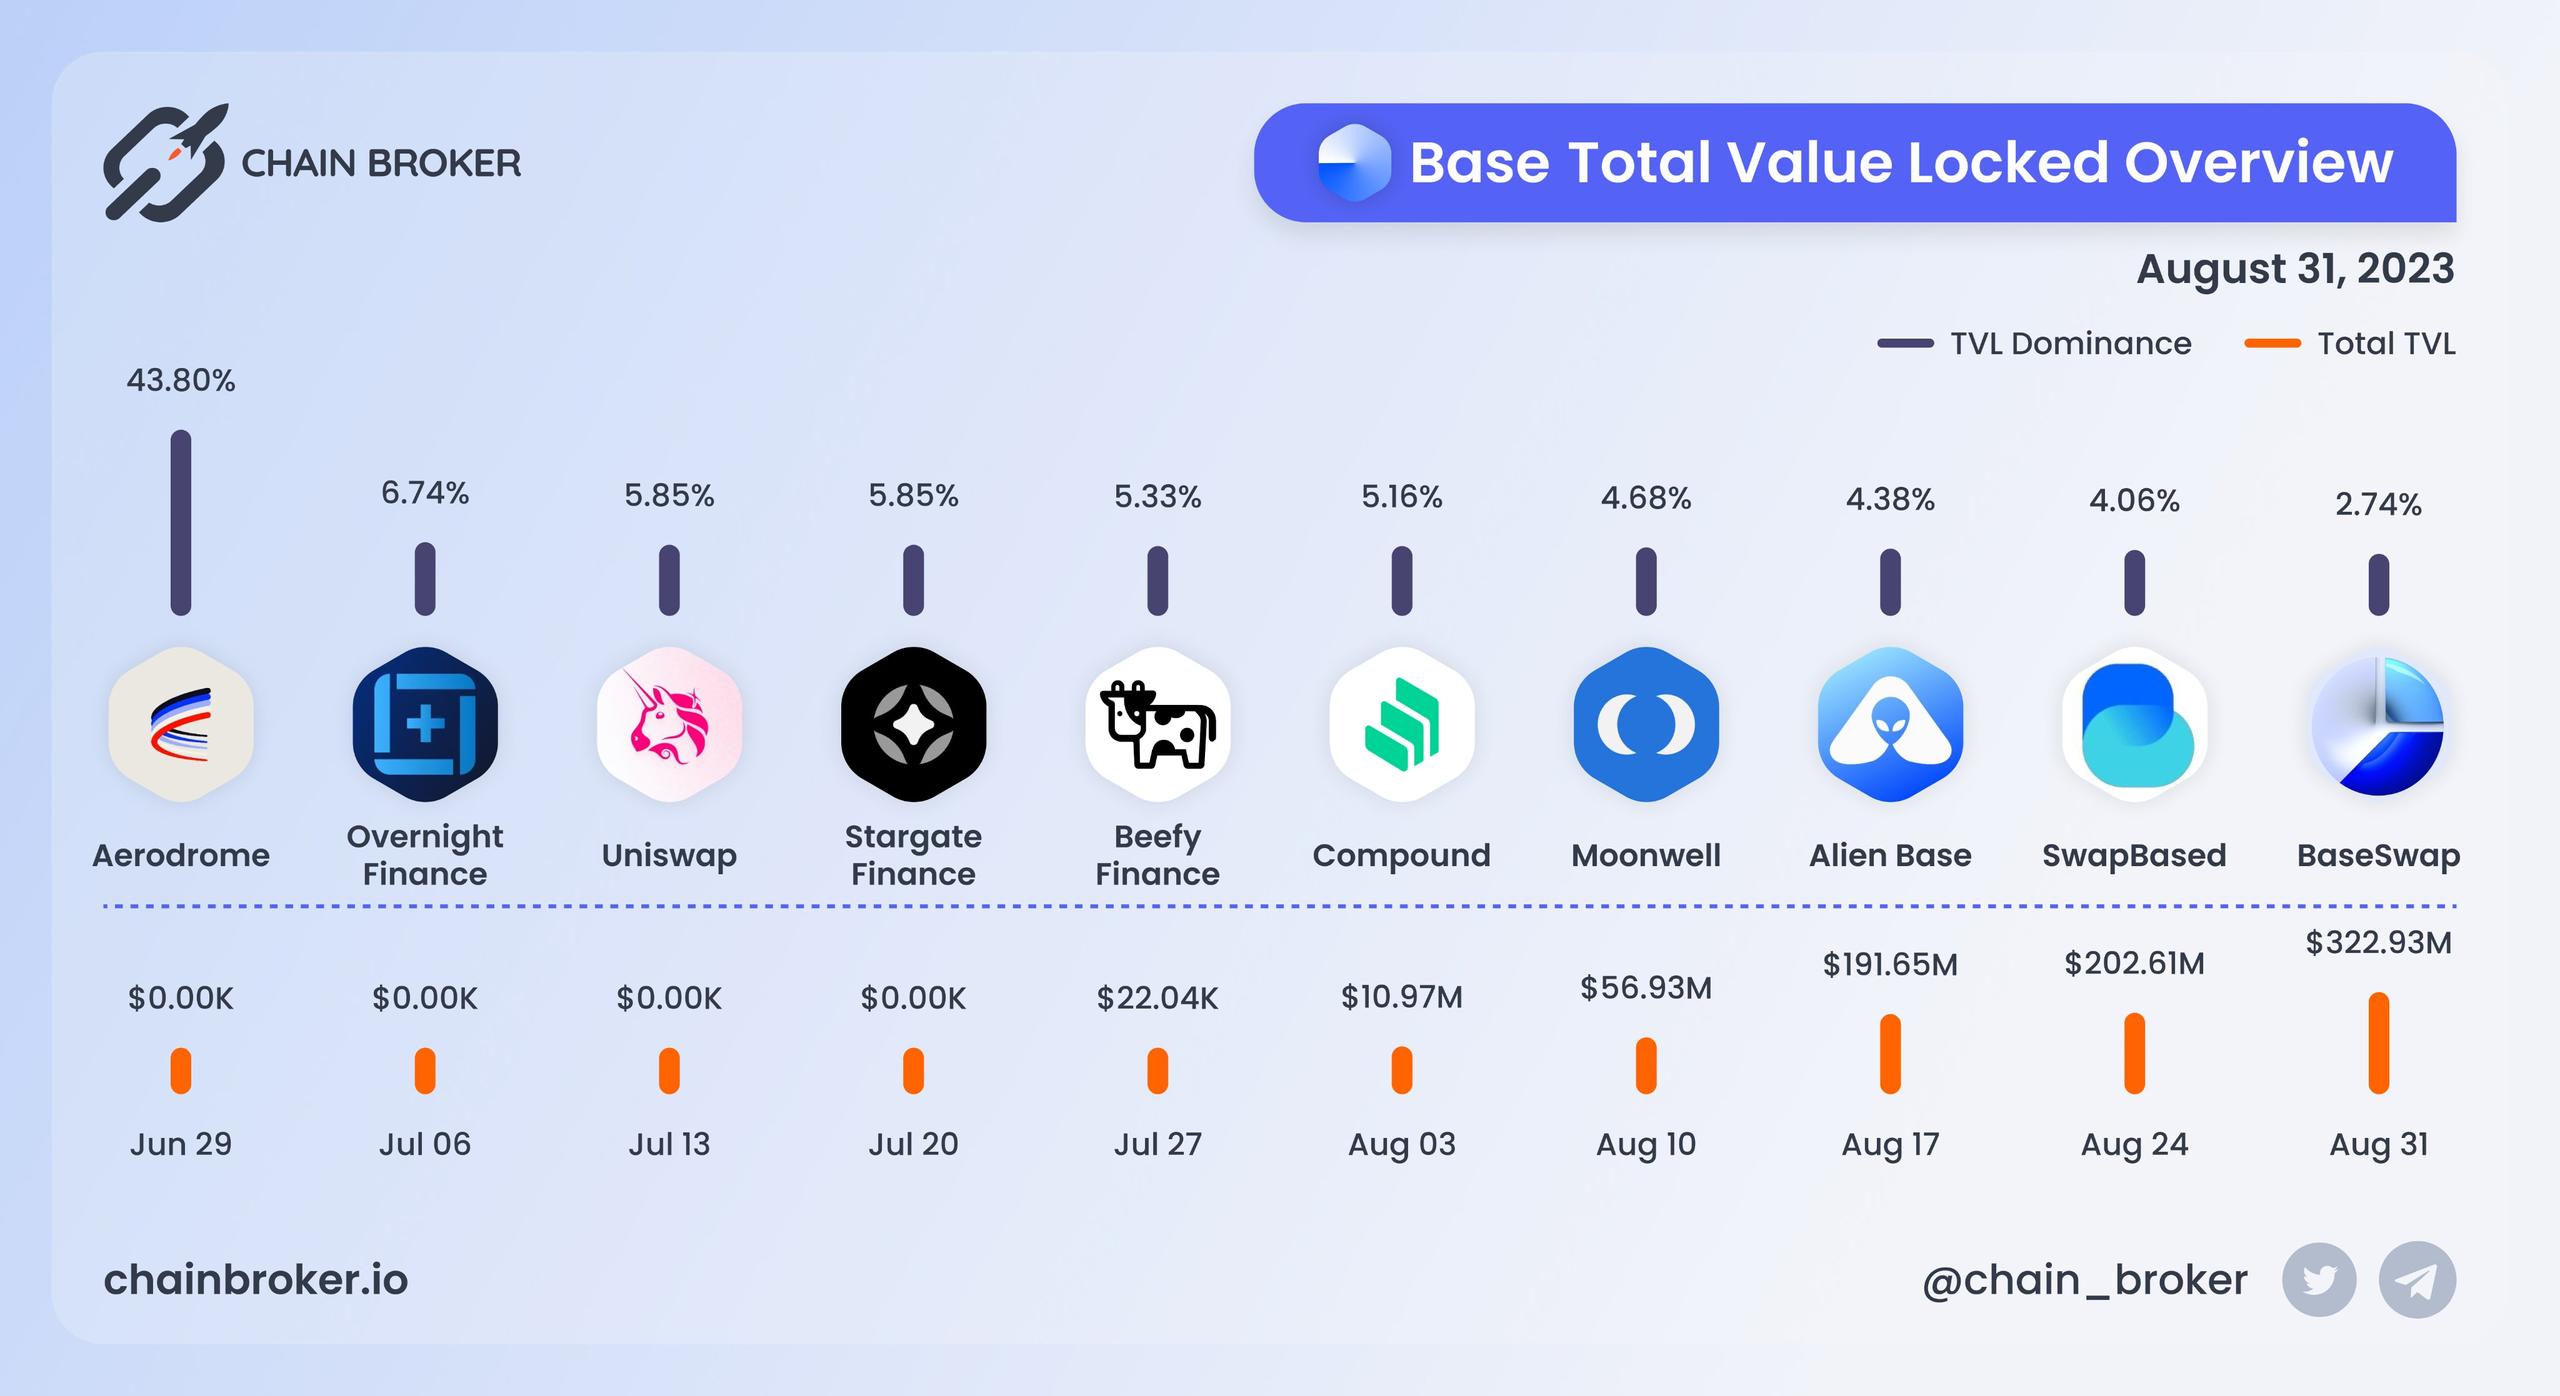 Base total value locked overview